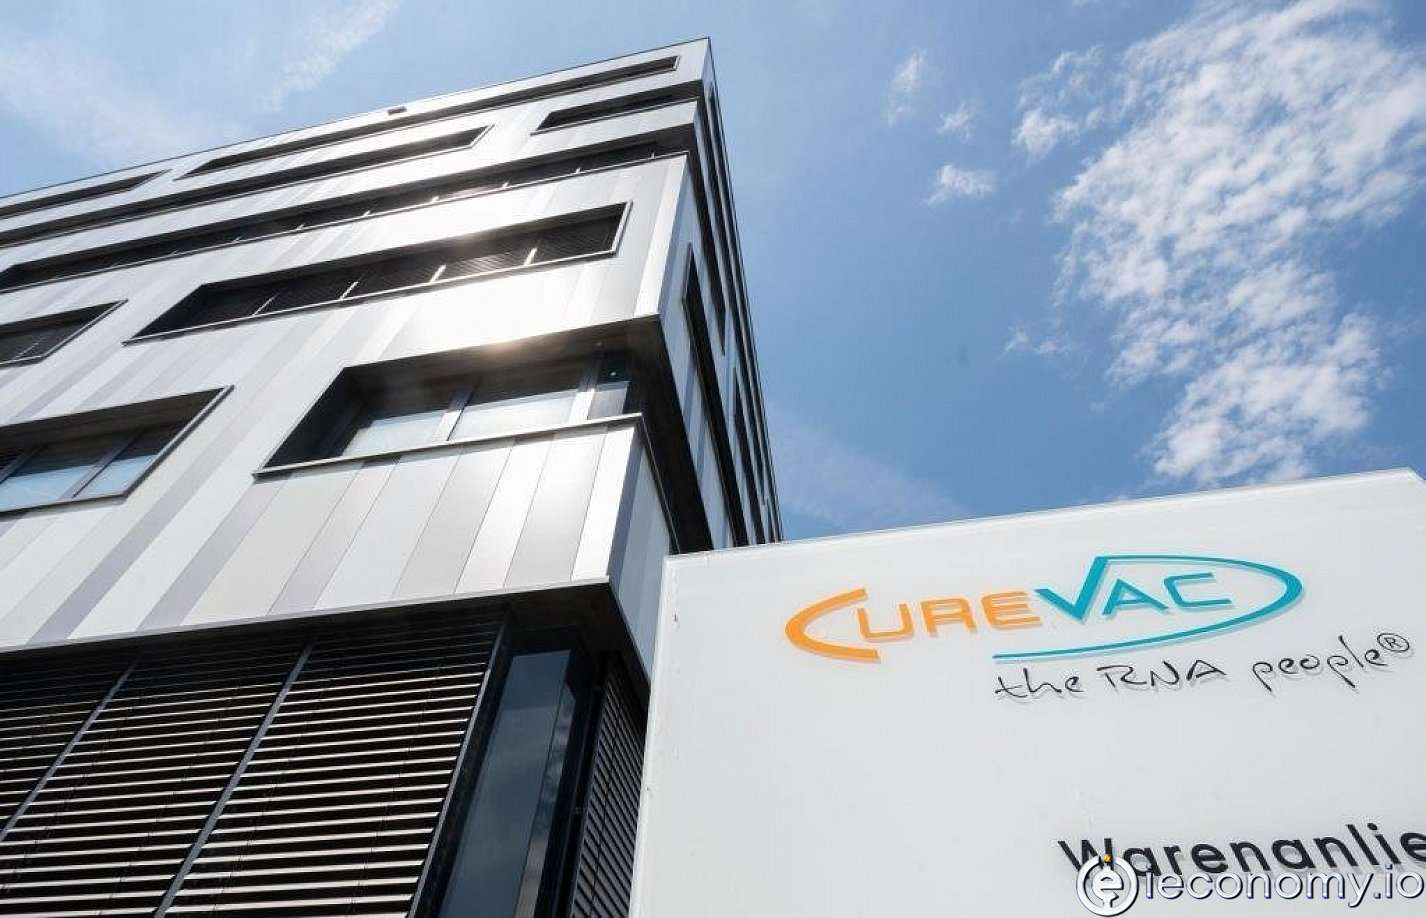 Curevac has terminated the contract with Wacker Chemie